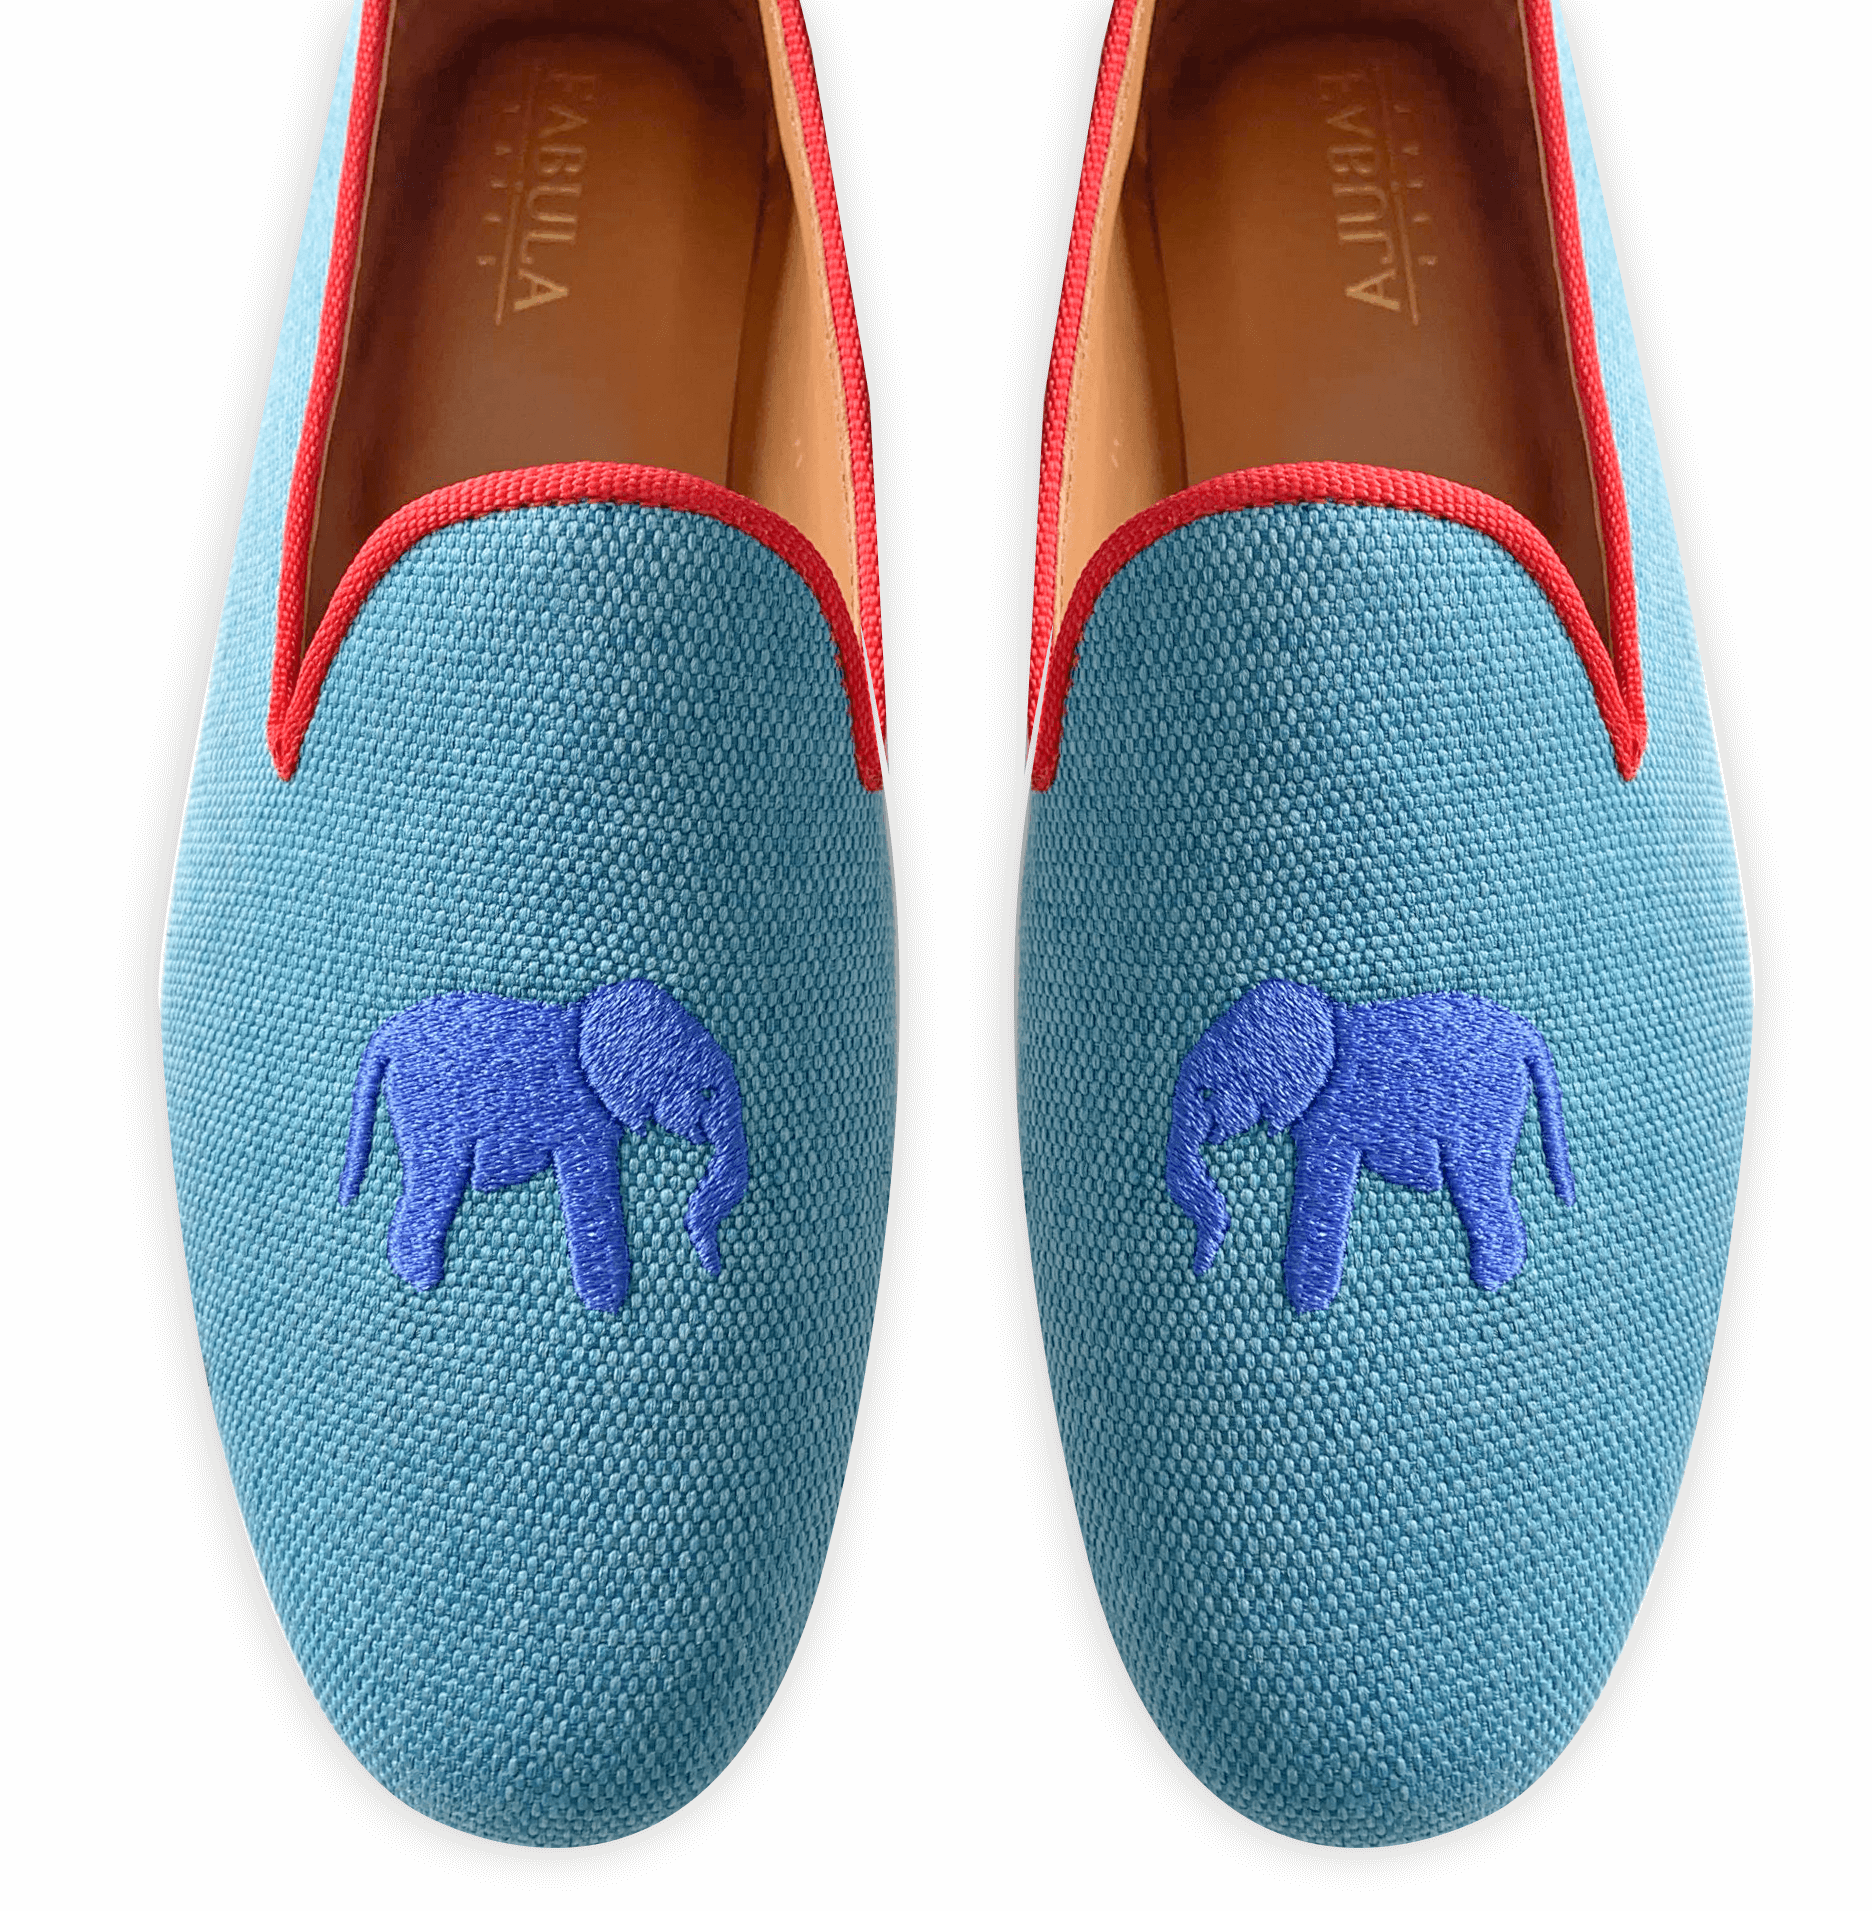 Blue linen slippers with red grosgrain trimming, blue elephant embroidery on top and nubuck leather sole.